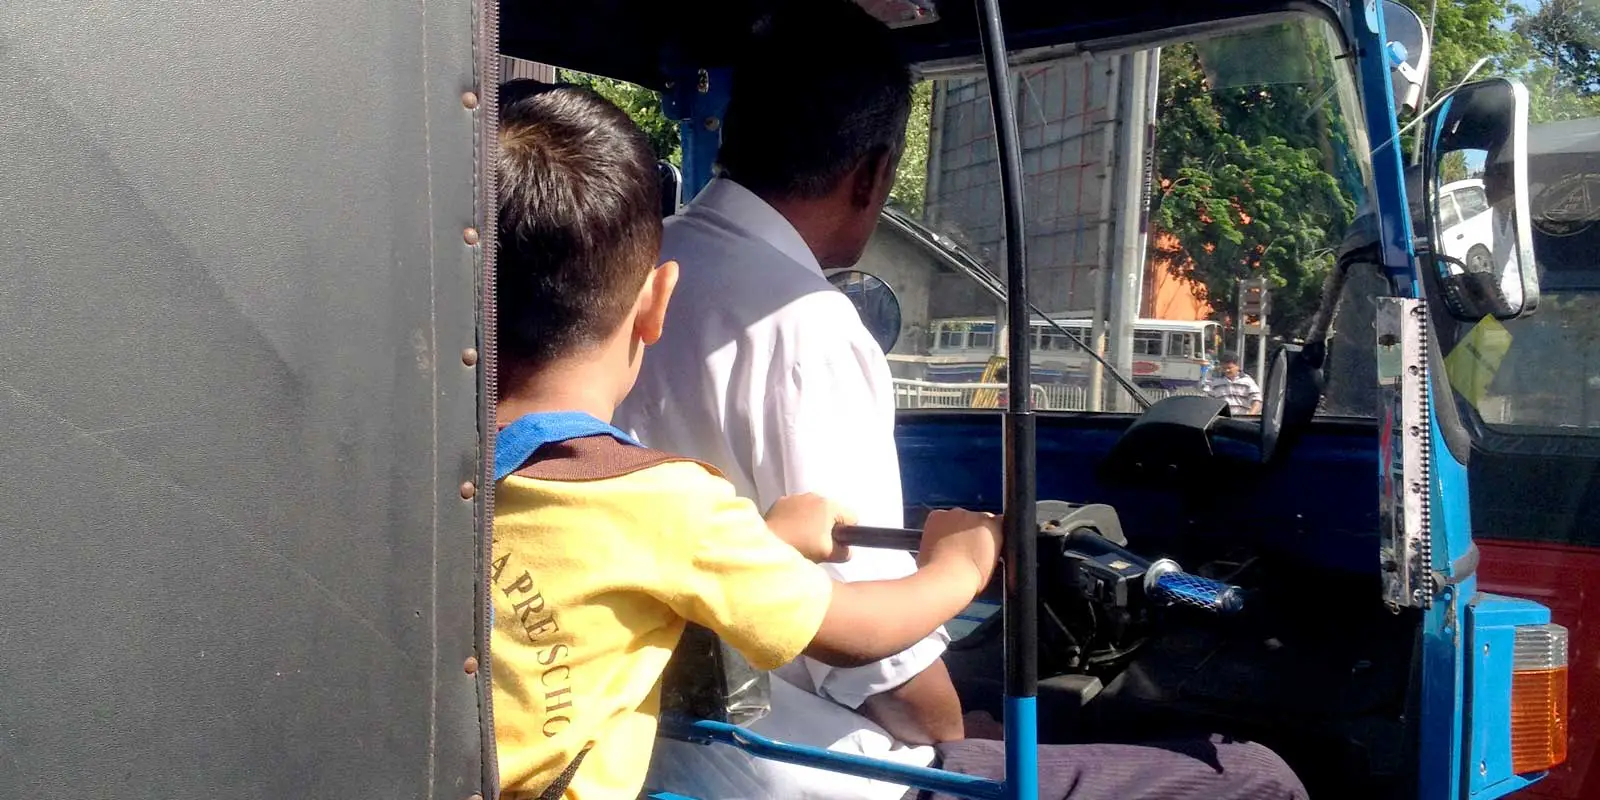 Tuk tuks are my favorite way to get around in Sri Lanka. Even this adorable schoolboy knows it's the best way to get around. It's cheap, you get a nice breeze, and you can get fun photos on your commute. Not for you? Come check out the other options for transportation in Sri Lanka.